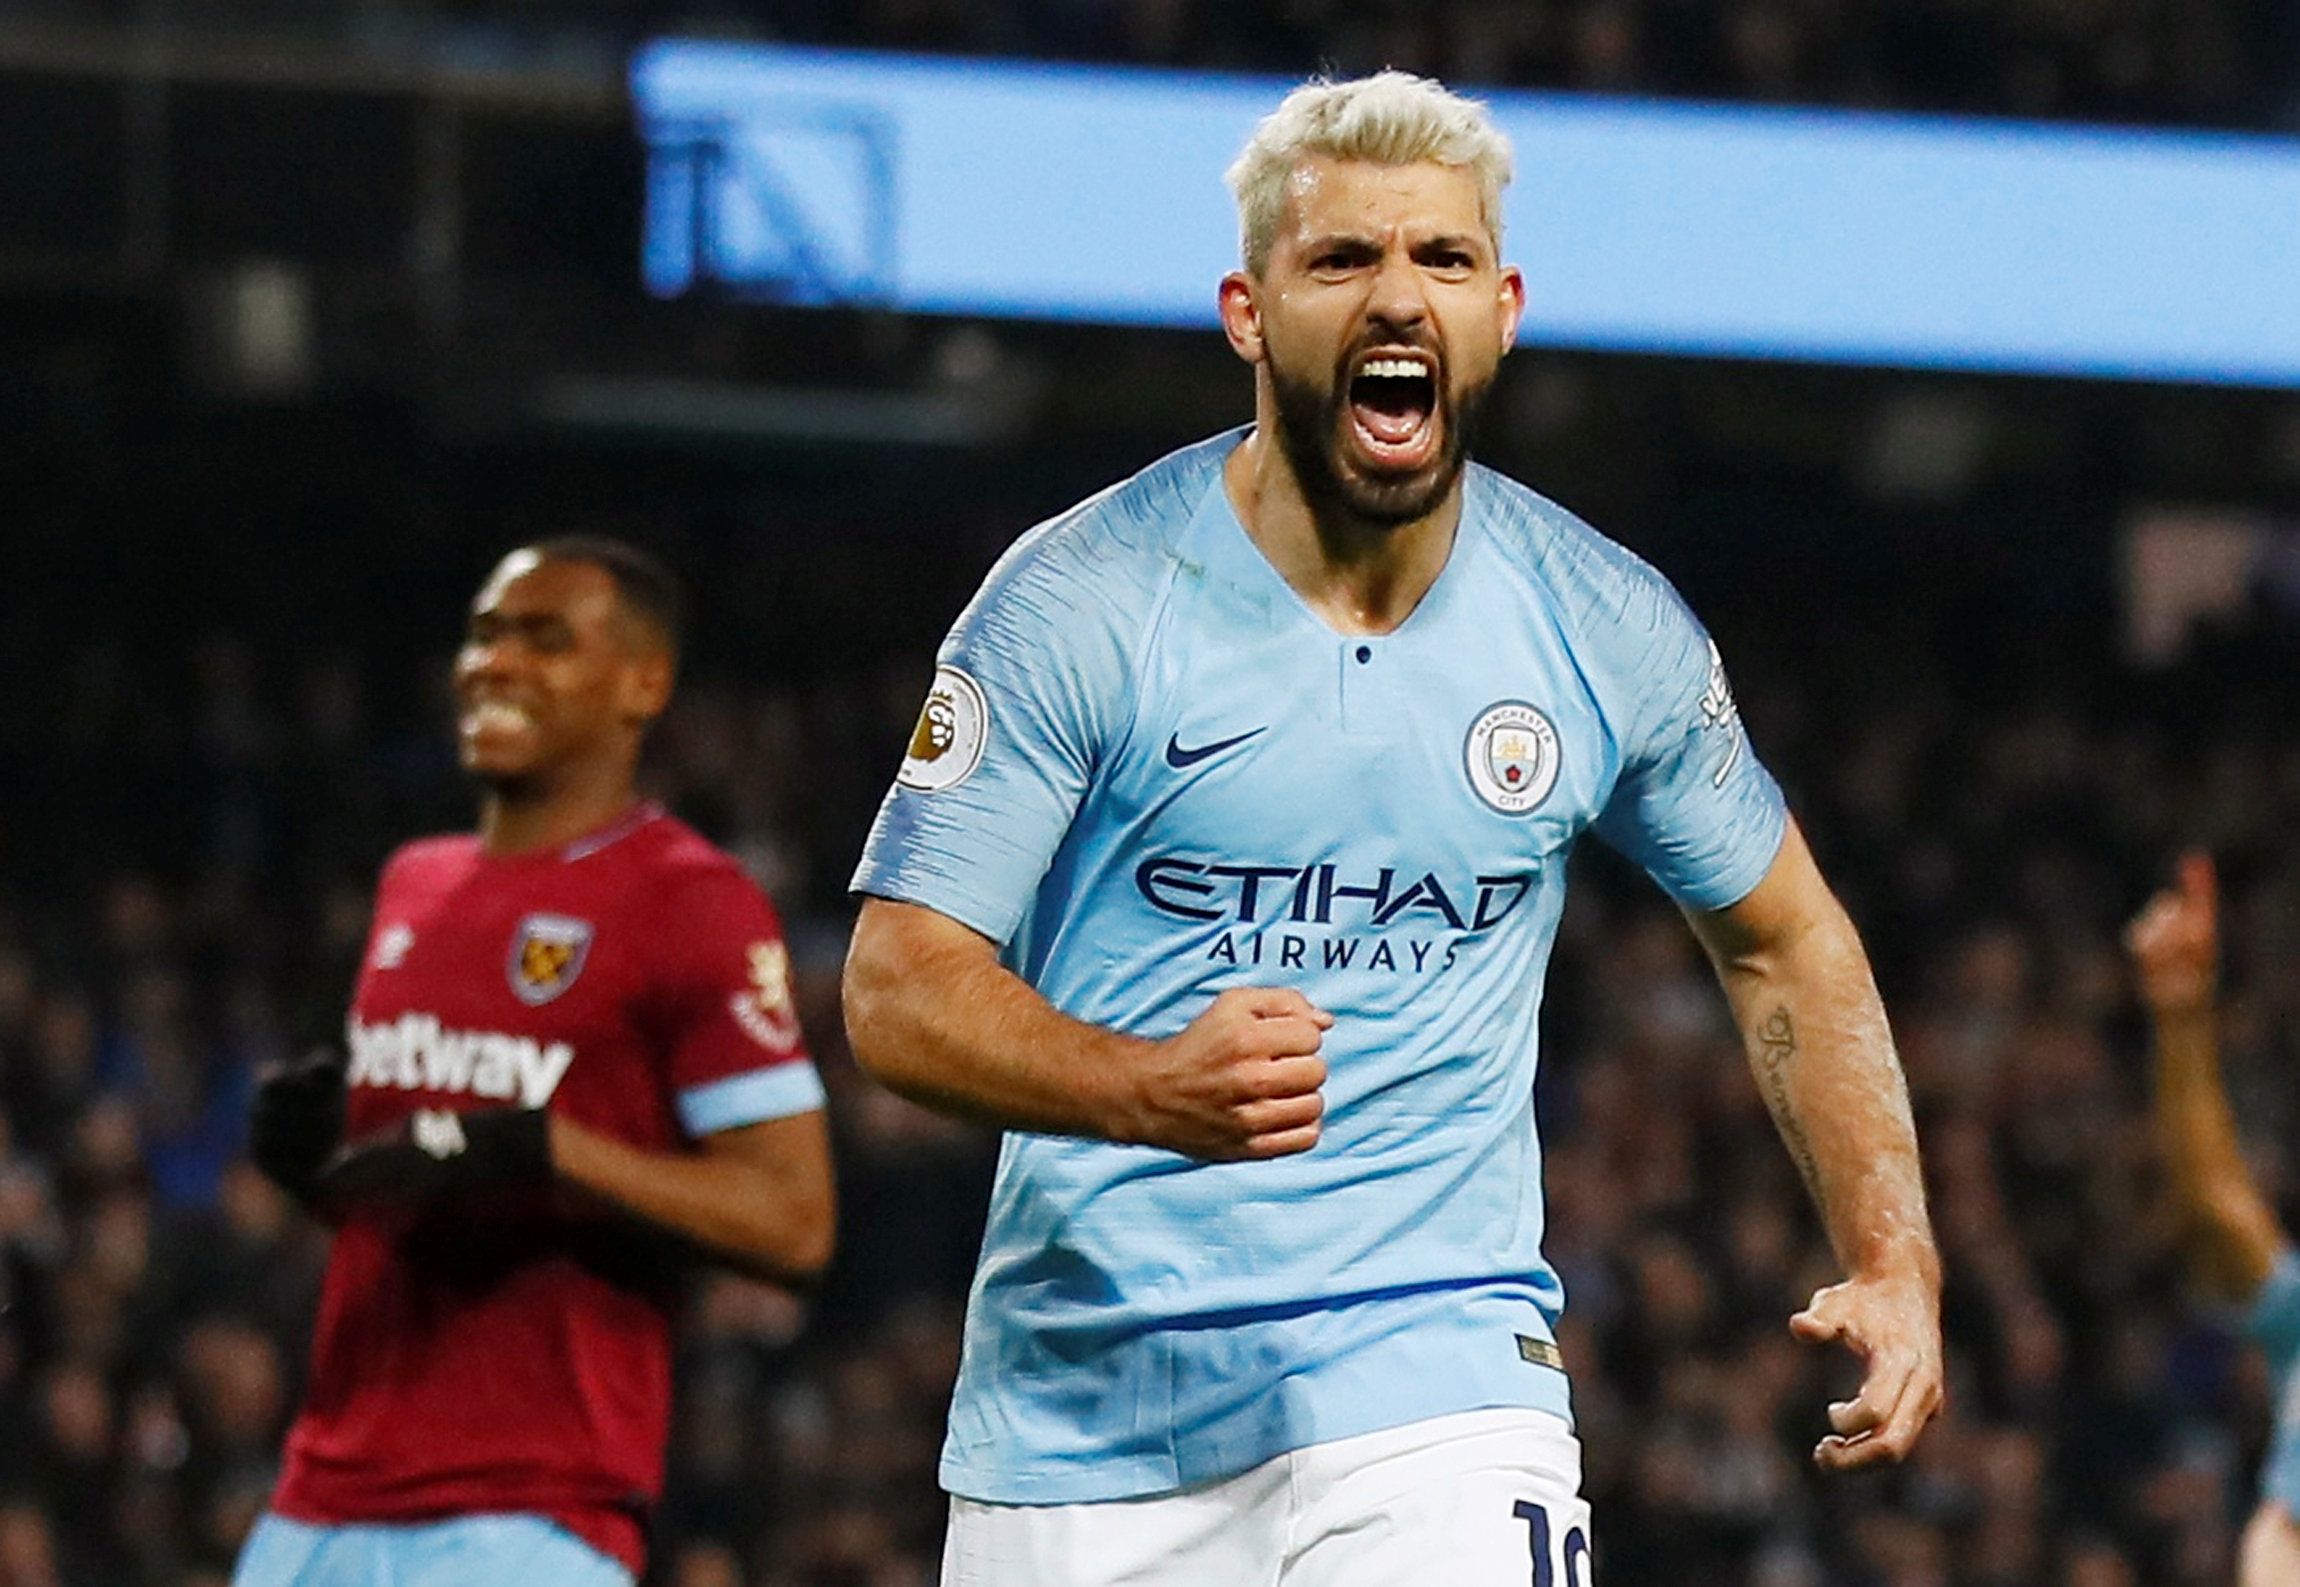 Soccer Football - Premier League - Manchester City v West Ham United - Etihad Stadium, Manchester, Britain - February 27, 2019  Manchester City's Sergio Aguero celebrates scoring their first goal from the penalty spot    Action Images via Reuters/Jason Cairnduff  EDITORIAL USE ONLY. No use with unauthorized audio, video, data, fixture lists, club/league logos or 